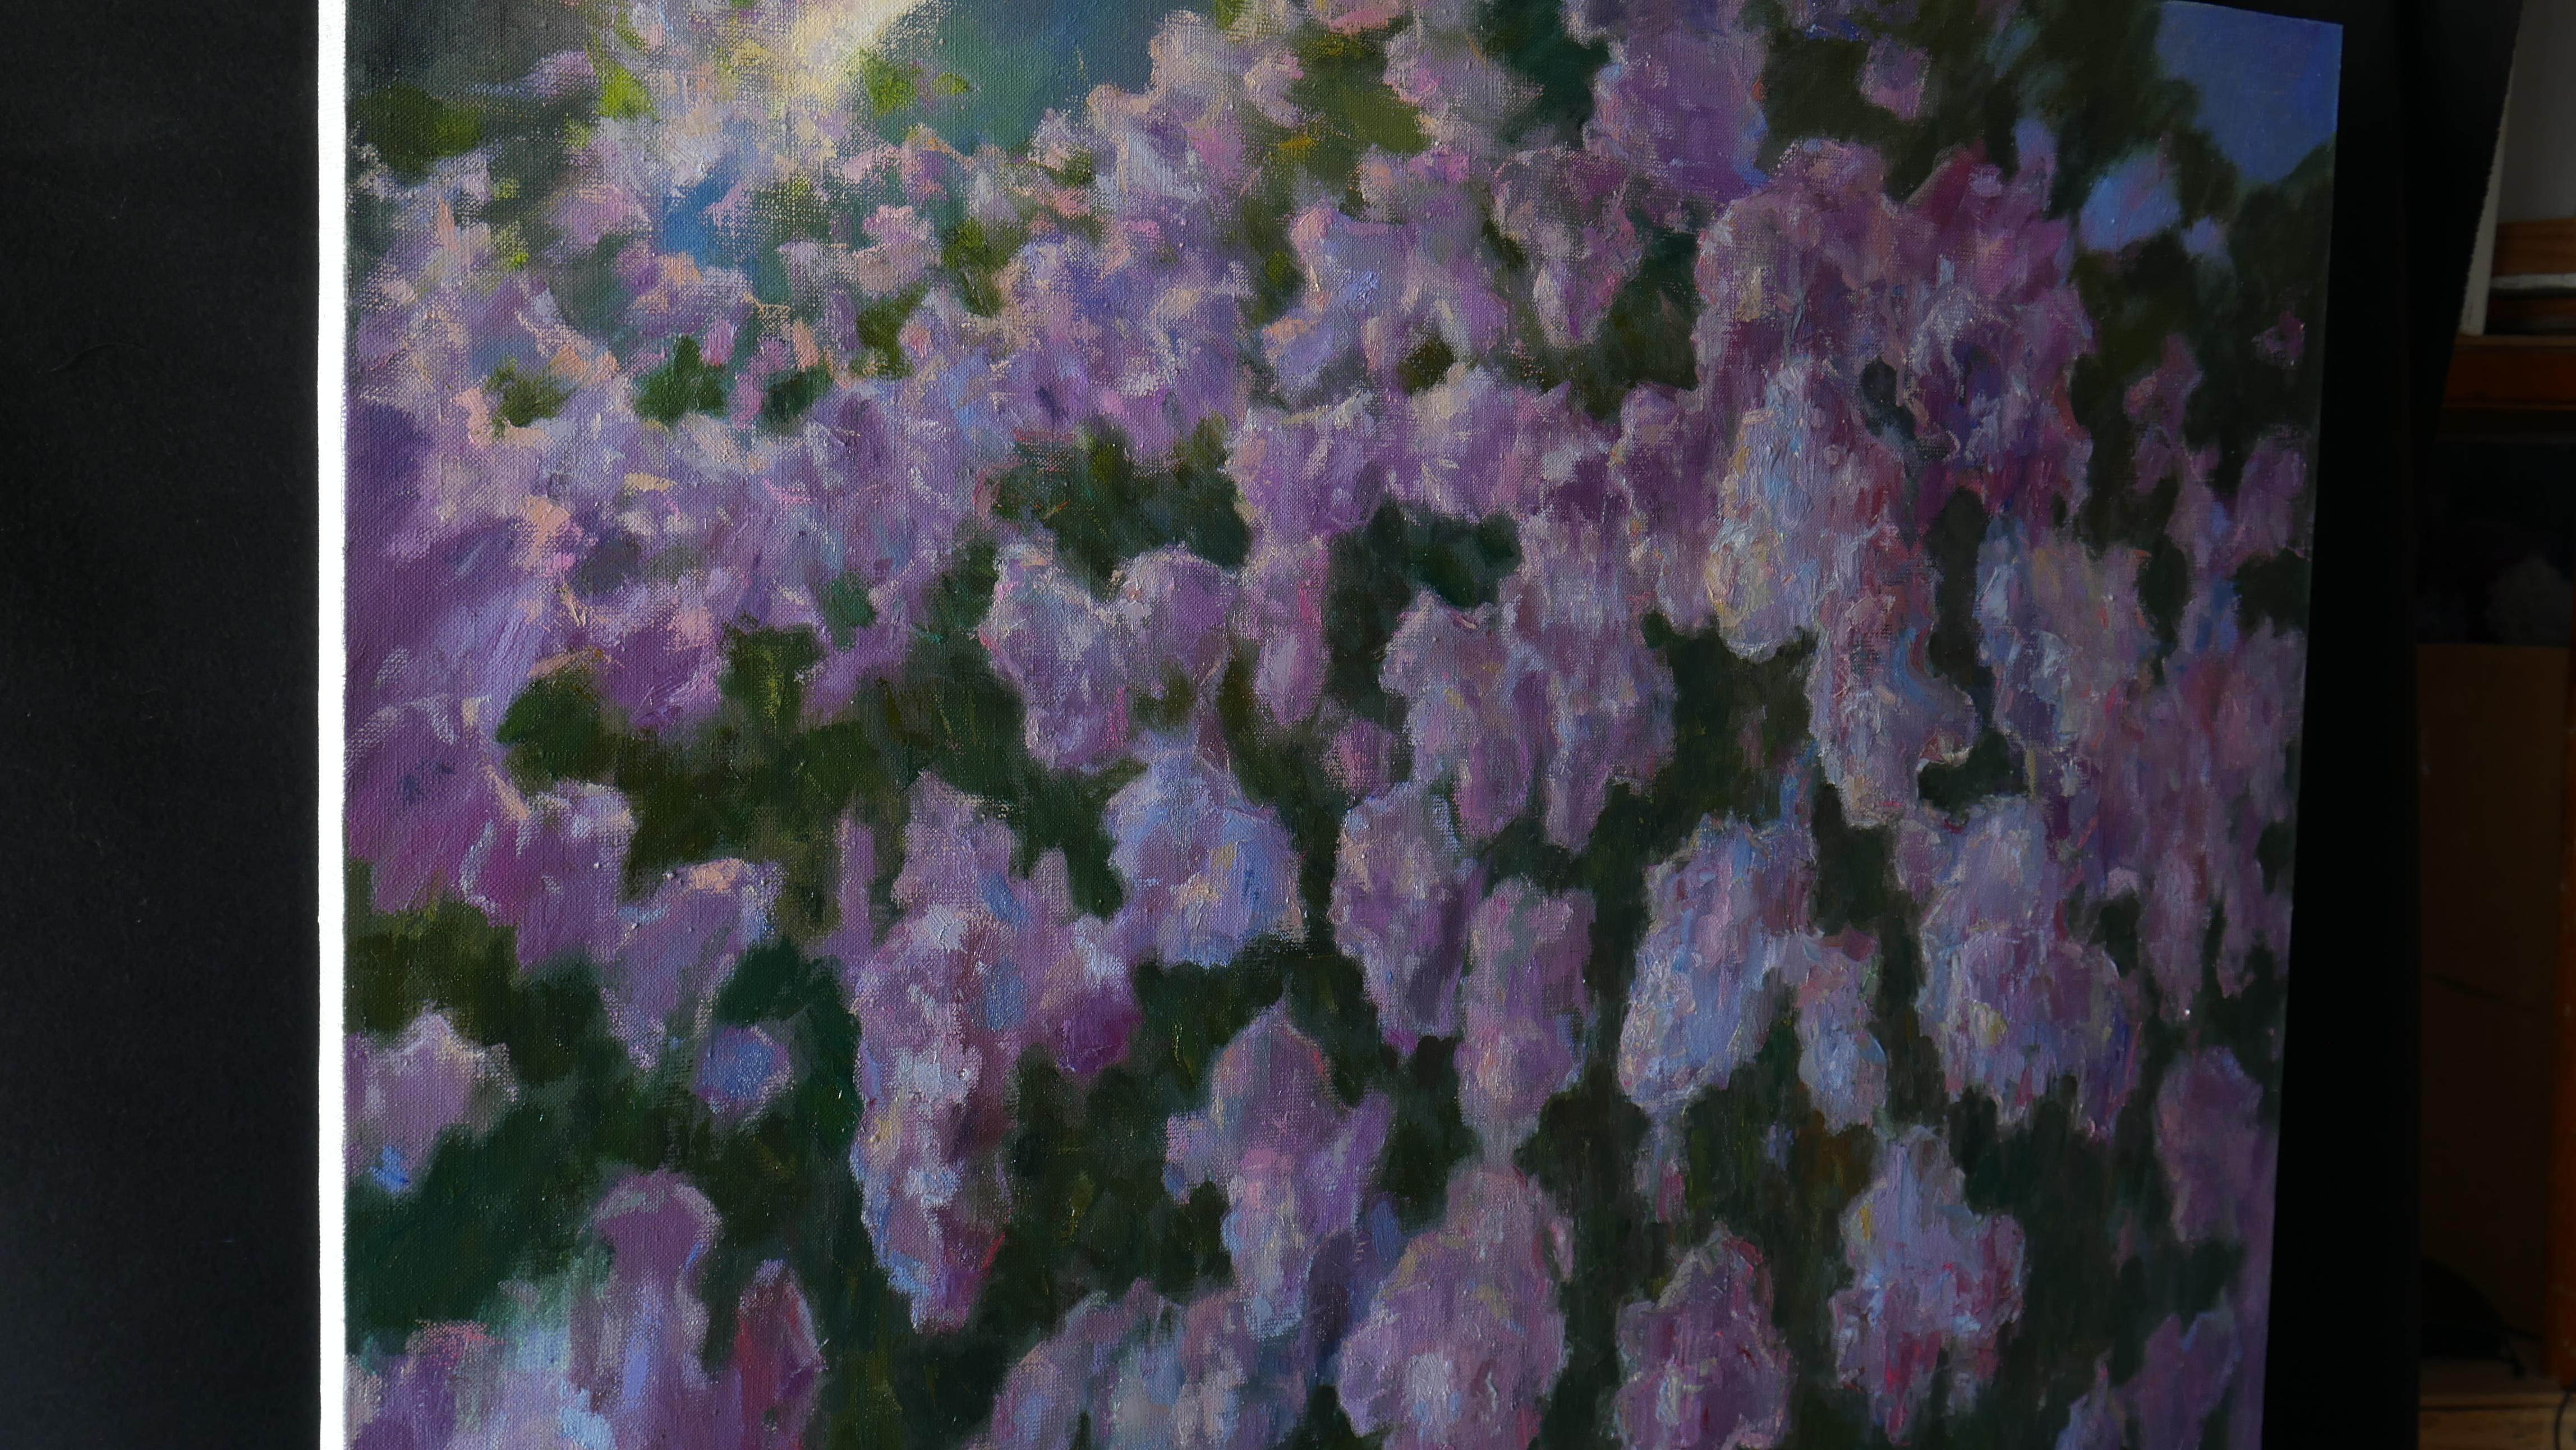 May Night In The Blooming Garden - Lilacs painting For Sale 10